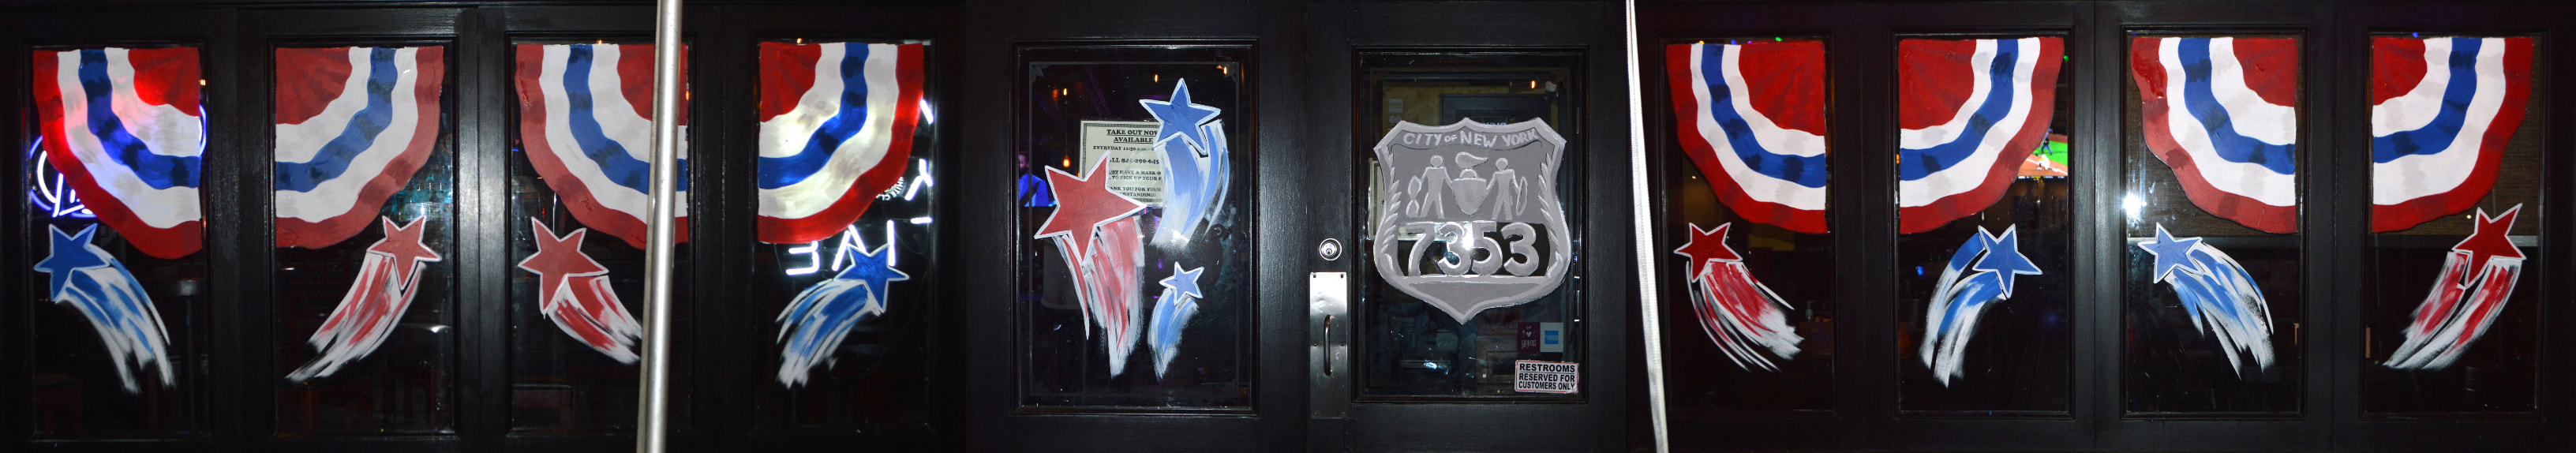 4th of July Window Painting at The Copper Still in Pomona, Rockland County, NY